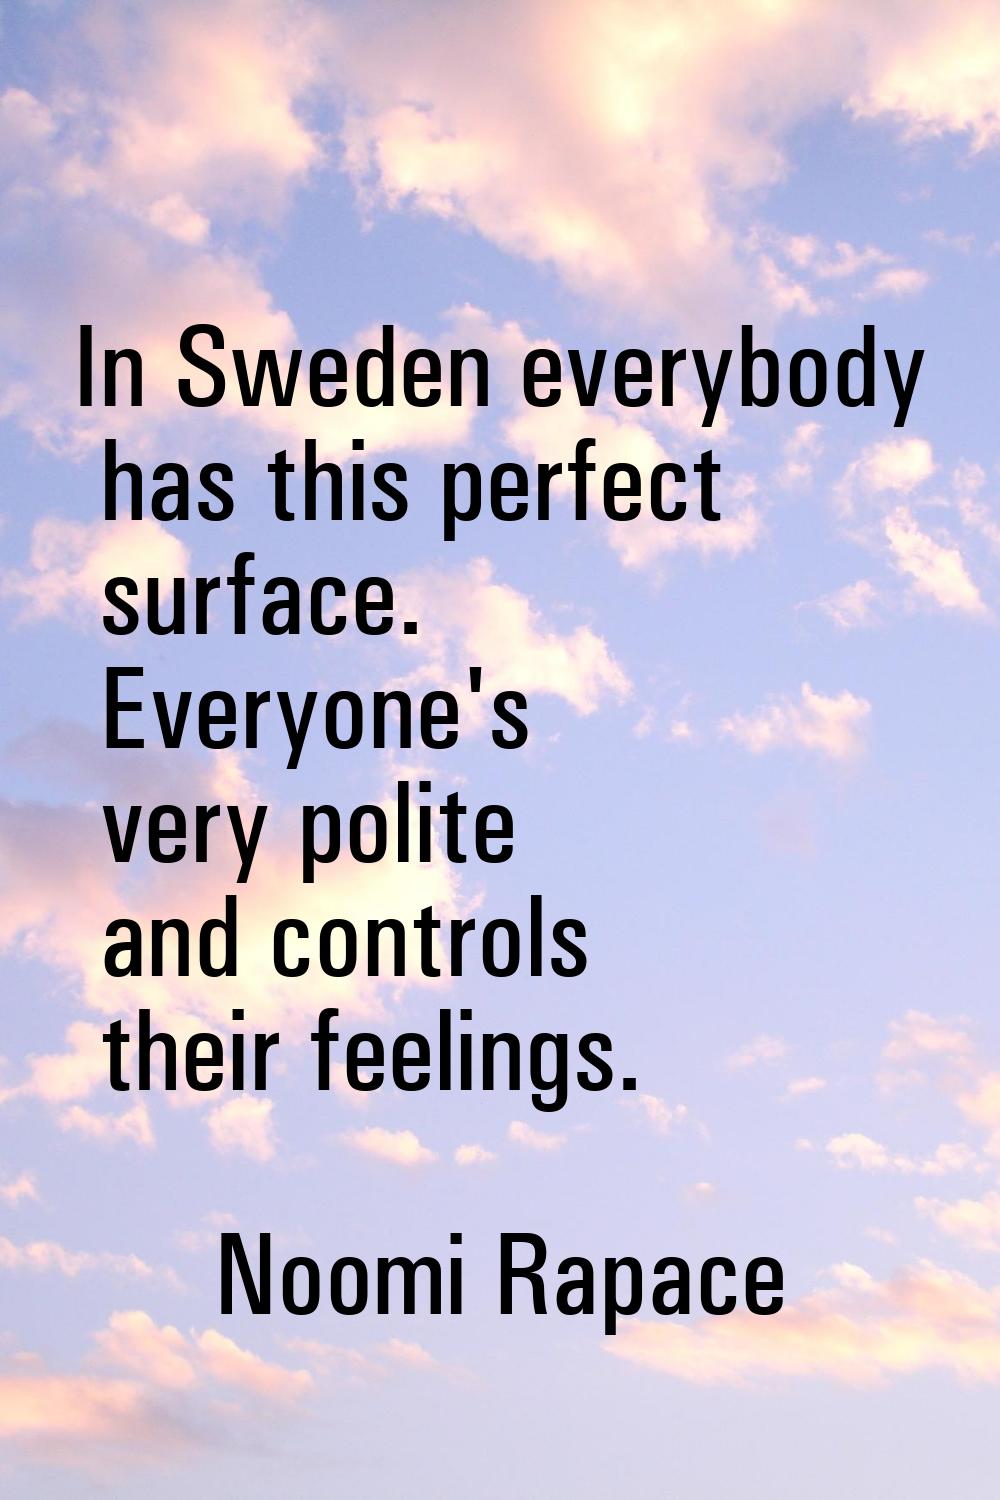 In Sweden everybody has this perfect surface. Everyone's very polite and controls their feelings.